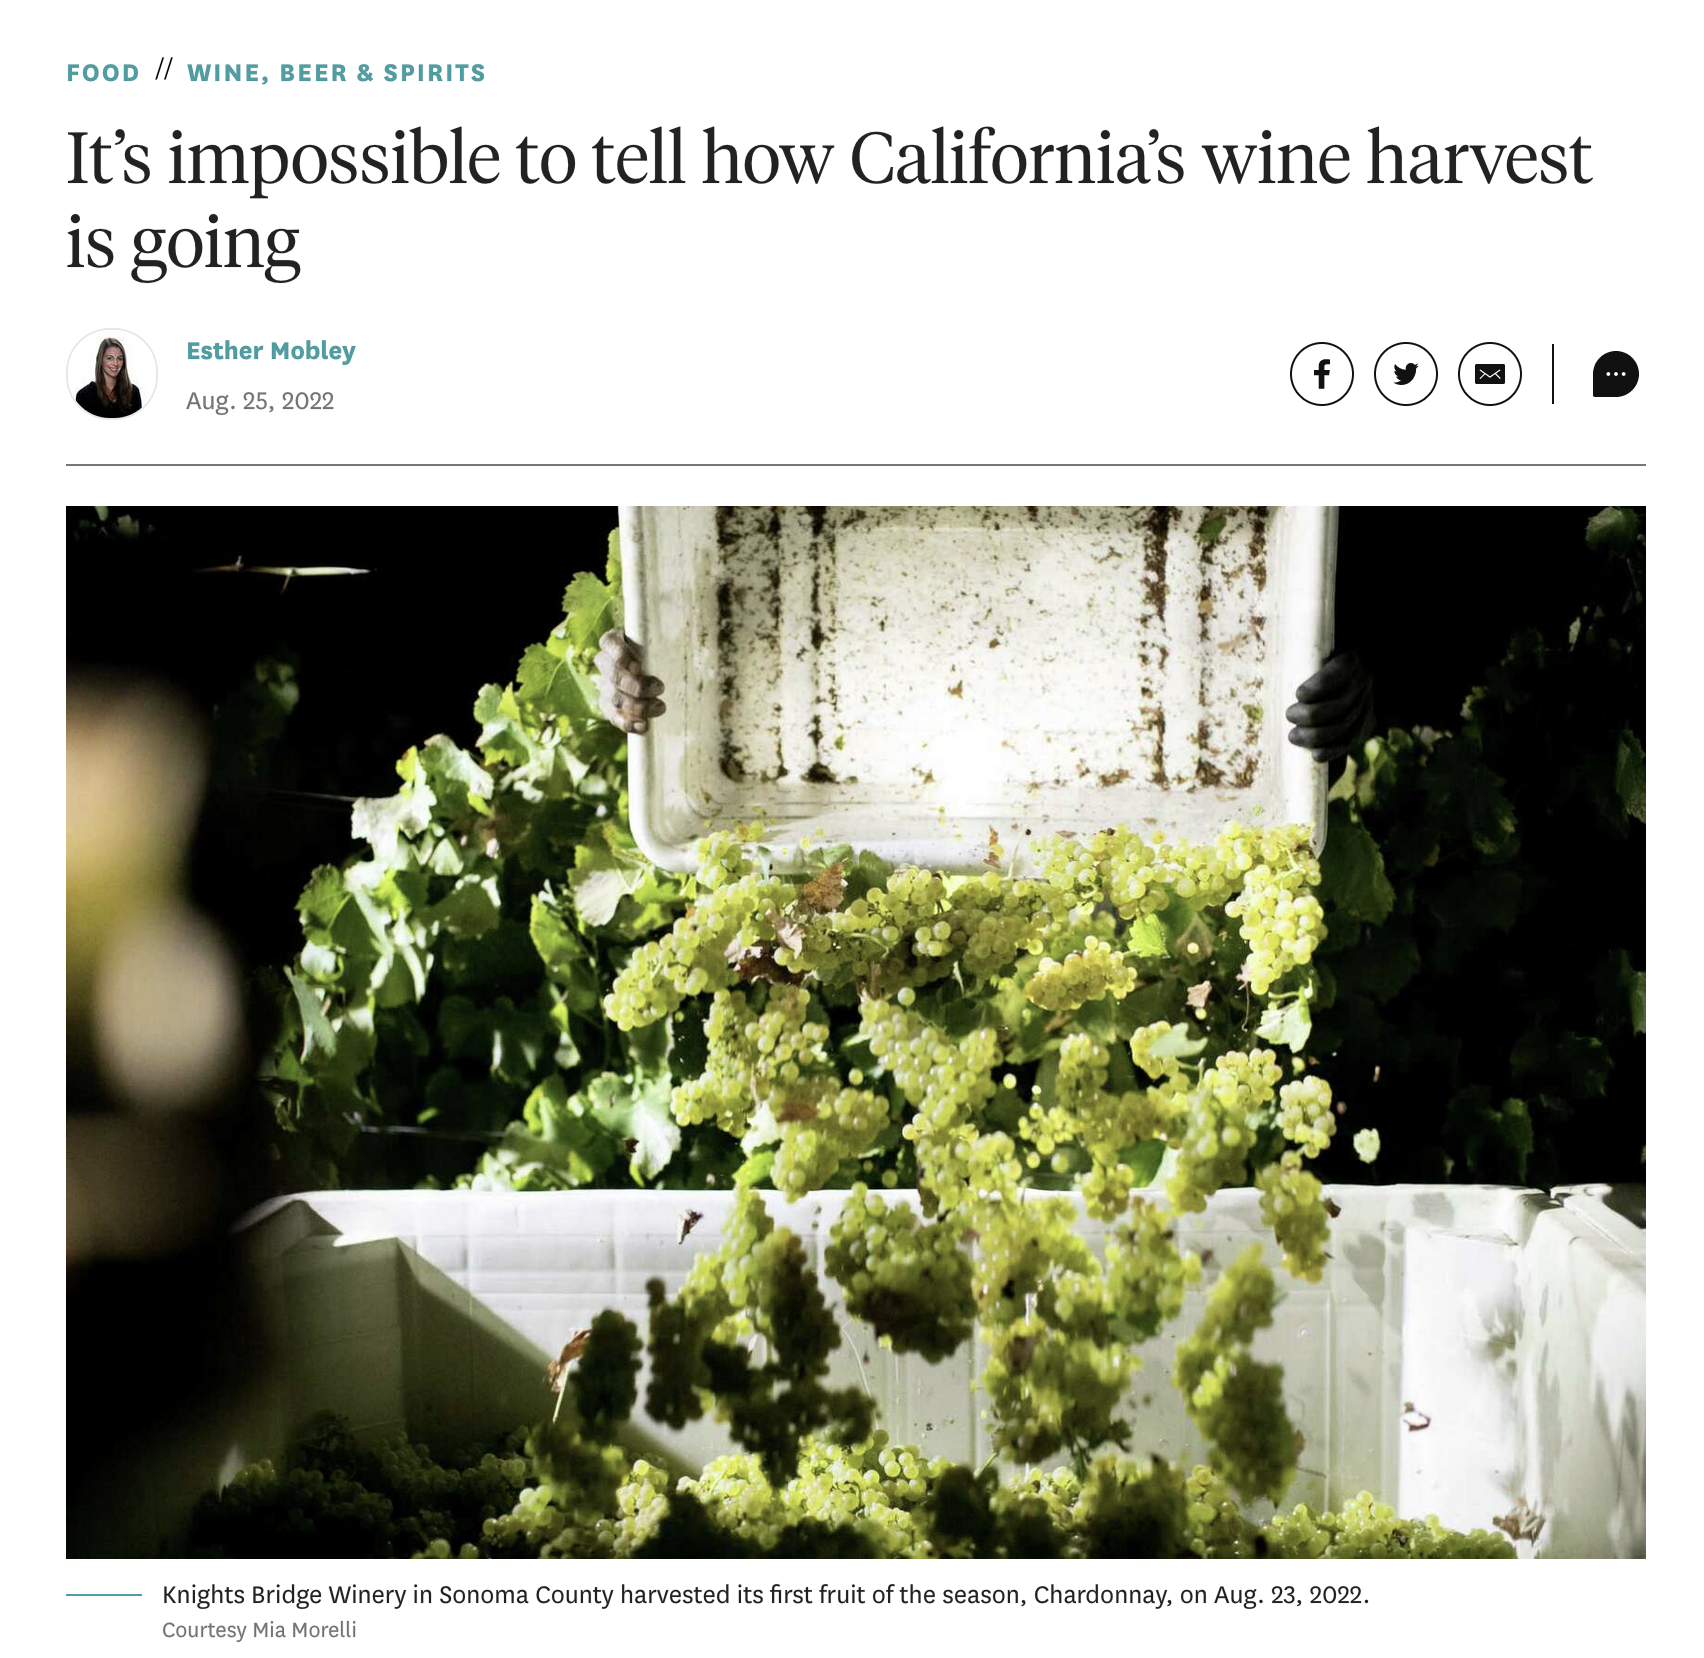 It’s impossible to tell how California’s wine harvest is going by Esther Mobley